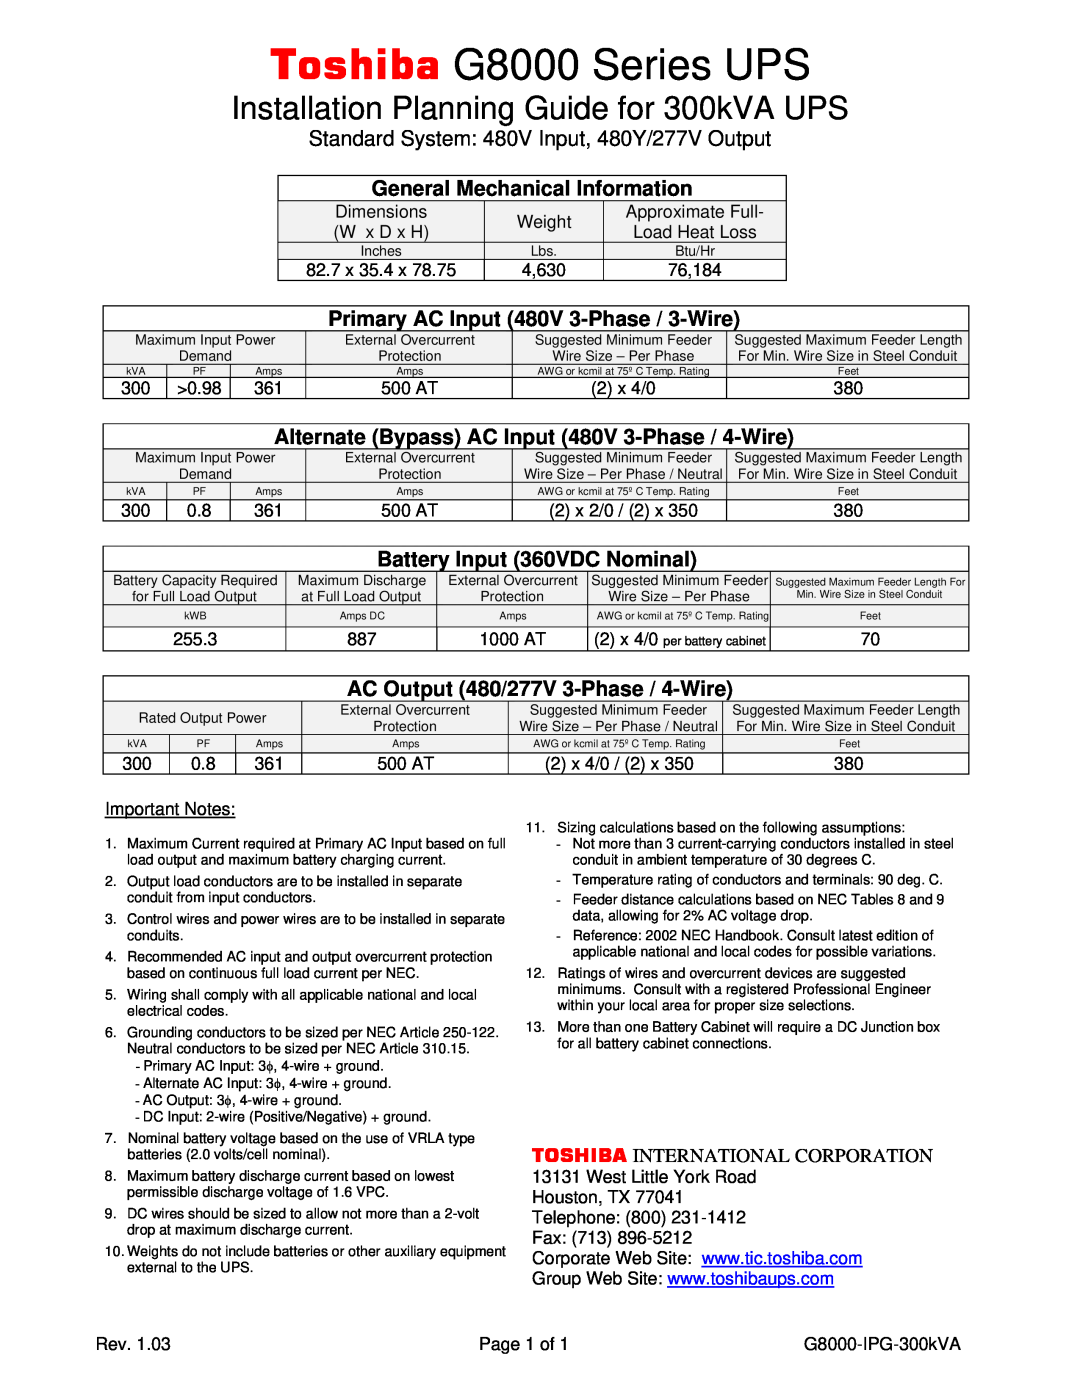 Toshiba dimensions Toshiba G8000 Series UPS, Installation Planning Guide for 300kVA UPS, General Mechanical Information 